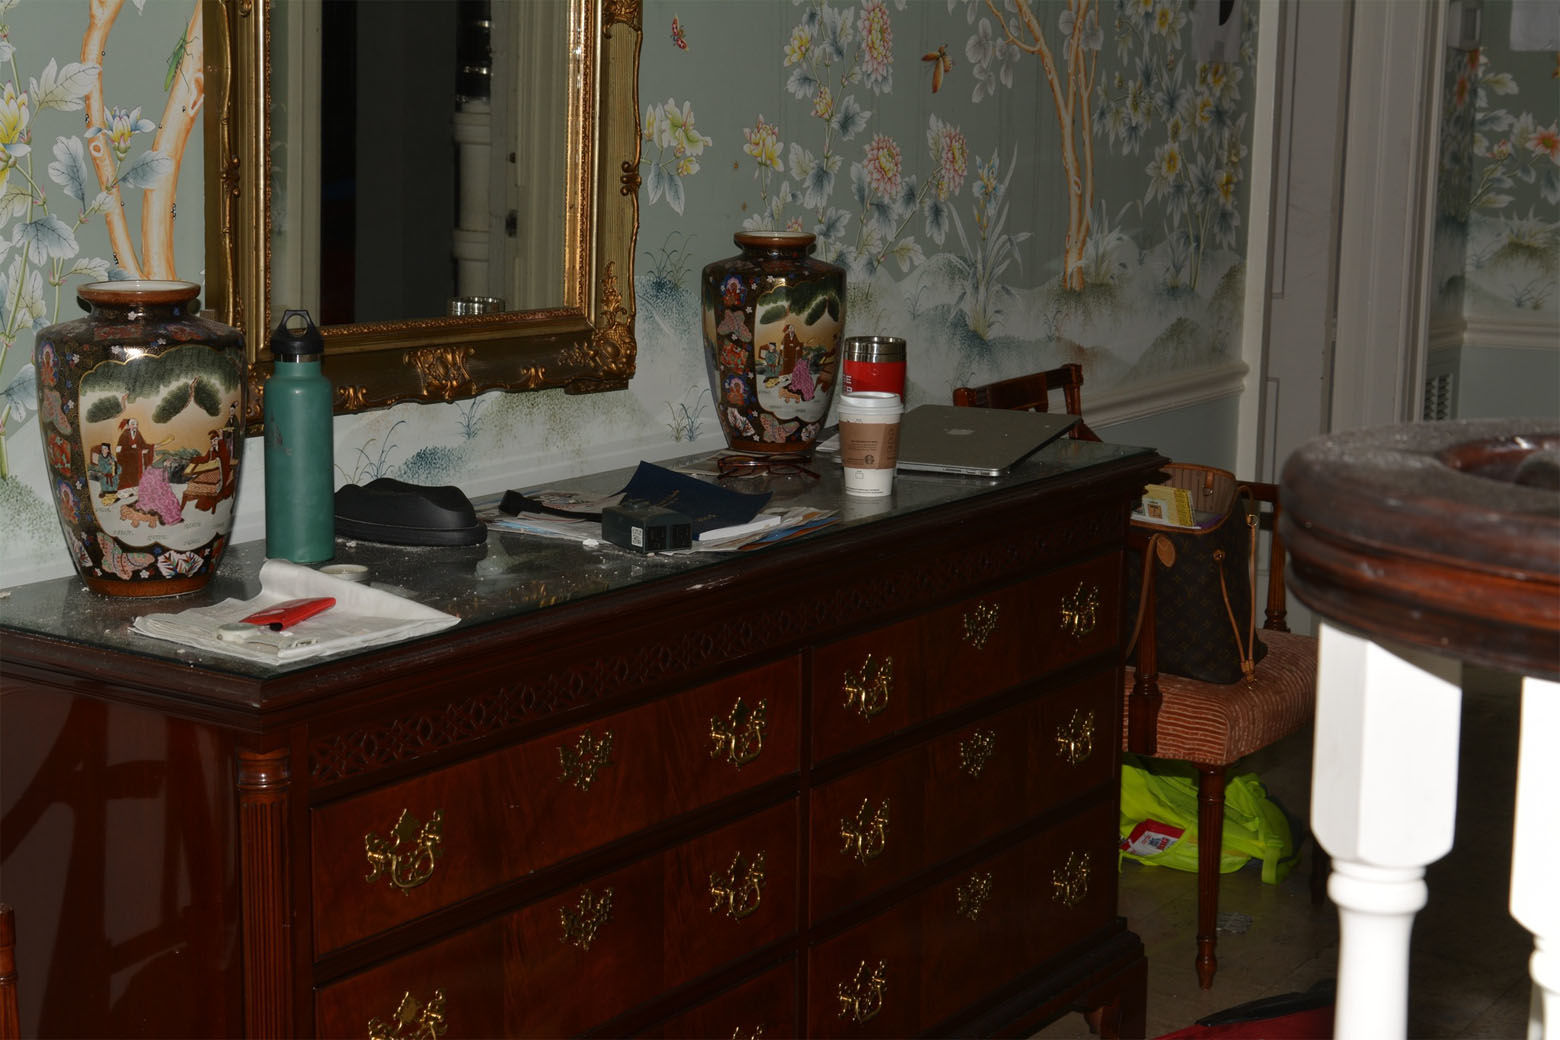 Prosecutors said Amy Savopoulos was out on a Starbucks run when Daron Wint got inside the house. When she returned home, he took her captive alongside her son and Vera Figueroa, one of the family's housekeepers. A Starbucks cup is seen on a bureau in the home's entryway. (Courtesy U.S. Attorney's Office for D.C.)